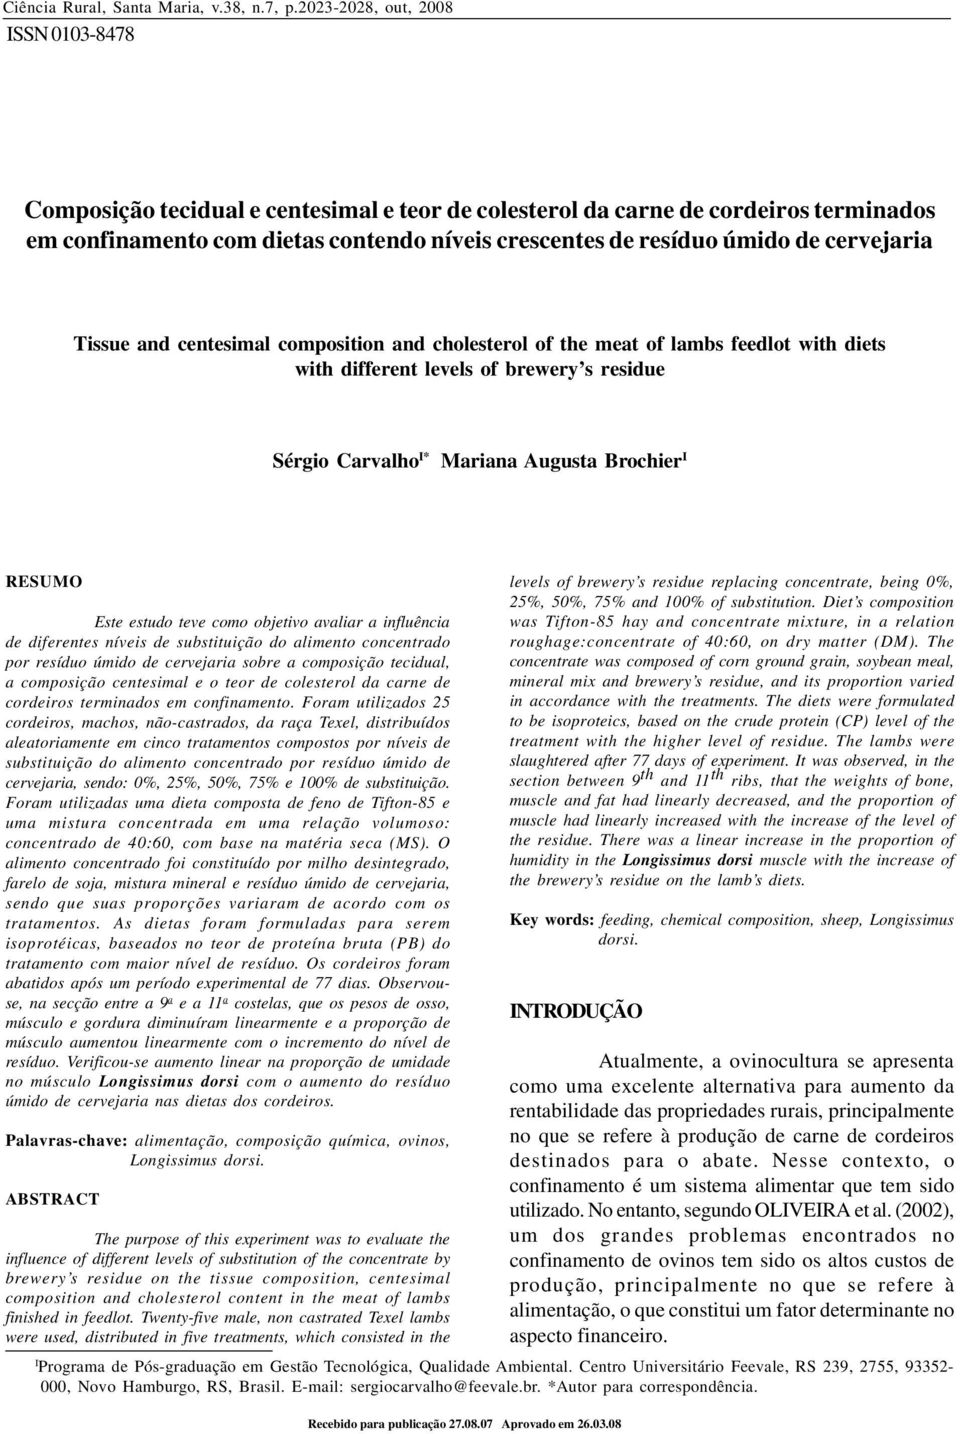 Tissue and centesimal composition and cholesterol of the meat of lambs feedlot with diets with different levels of brewery s residue Sérgio Carvalho I* Mariana Augusta Brochier I RESUMO Este estudo